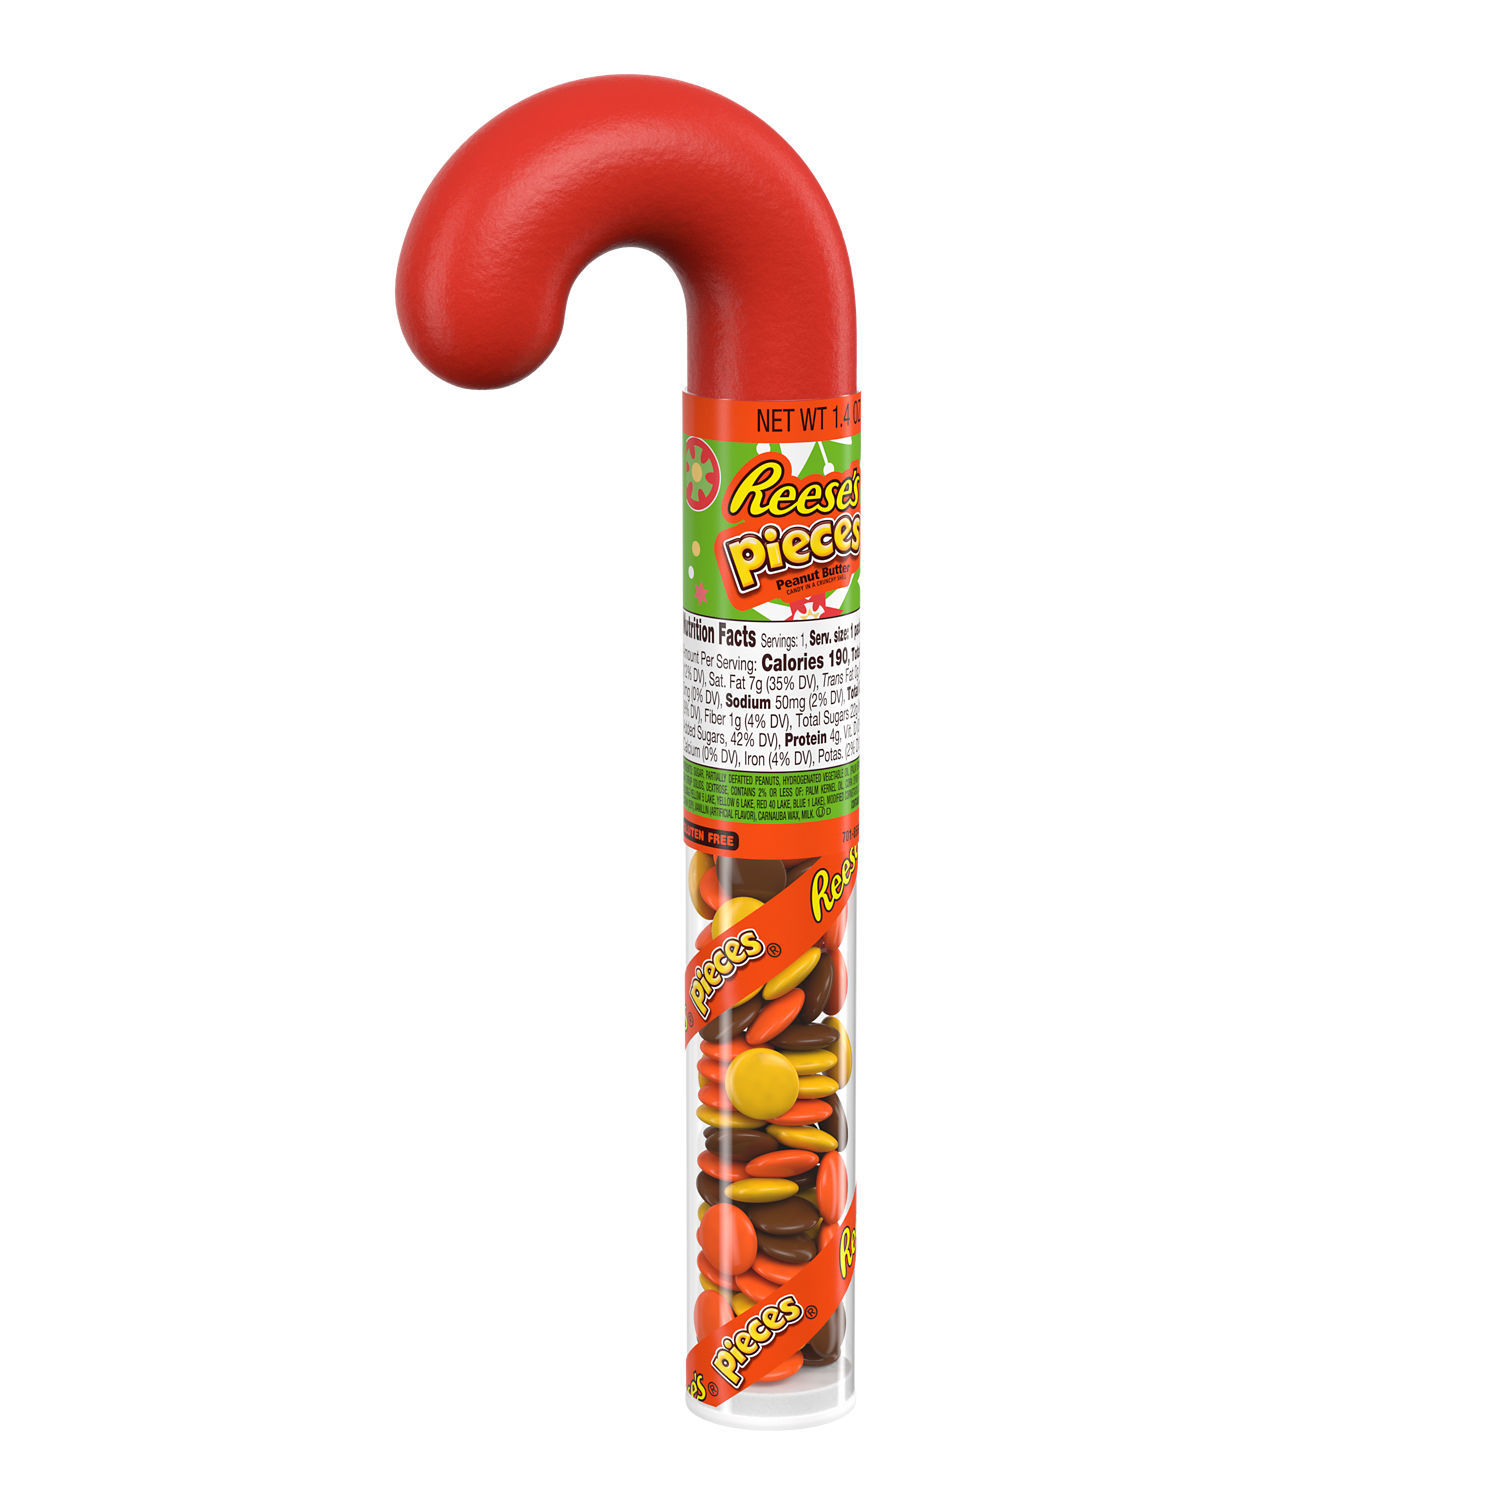 Reese's Pieces Peanut Butter Christmas Candy, Plastic Cane 1.4 oz - image 1 of 8